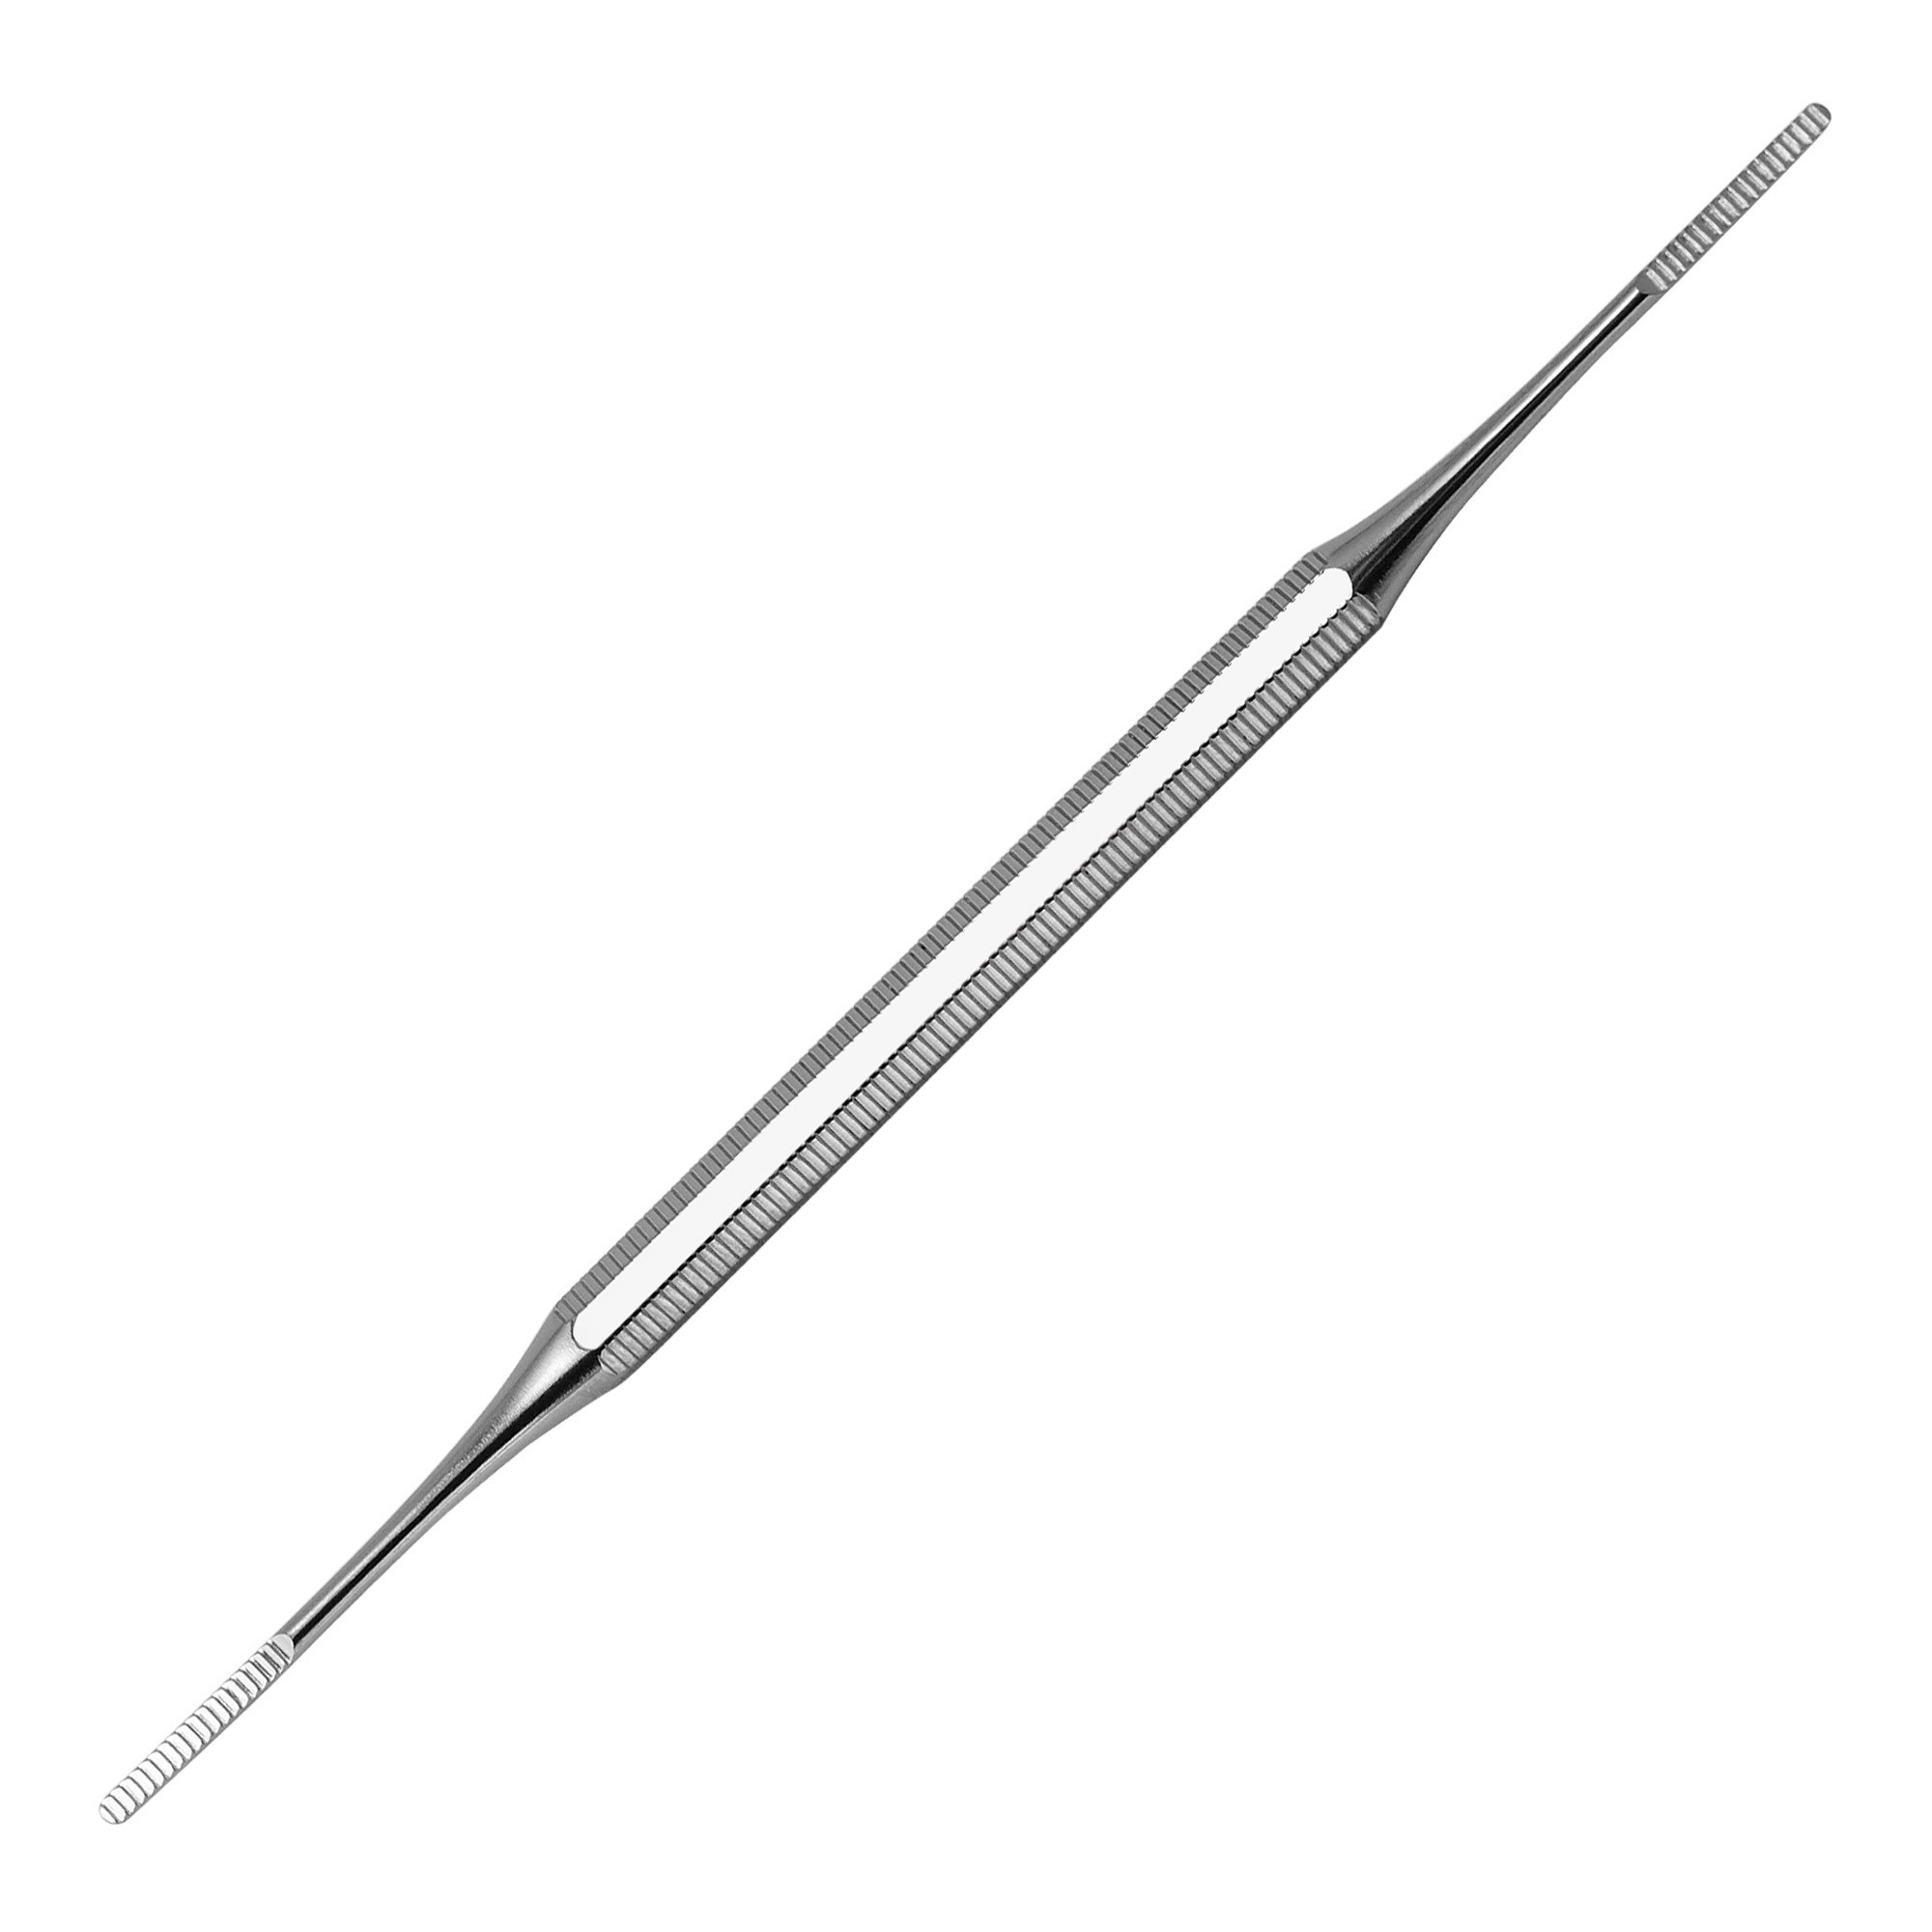 Professional stainless steel double-tip file instrument with microlima